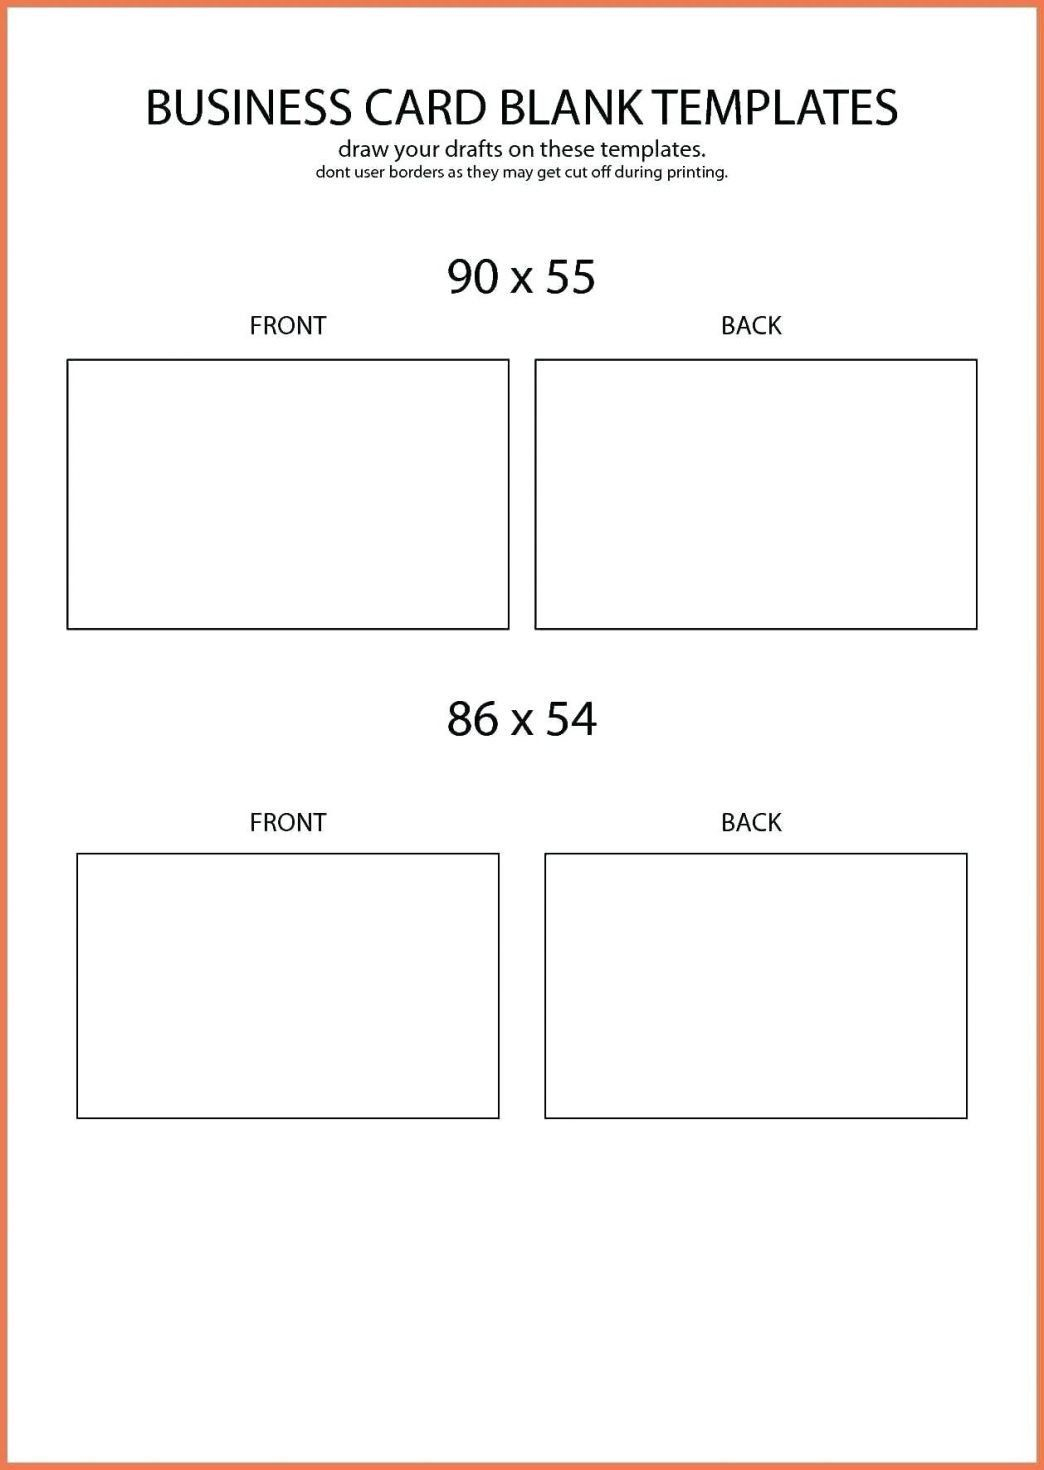 Custom Blank Business Card Template Adobe Illustrator Intended For Playing Card Template Illustrator